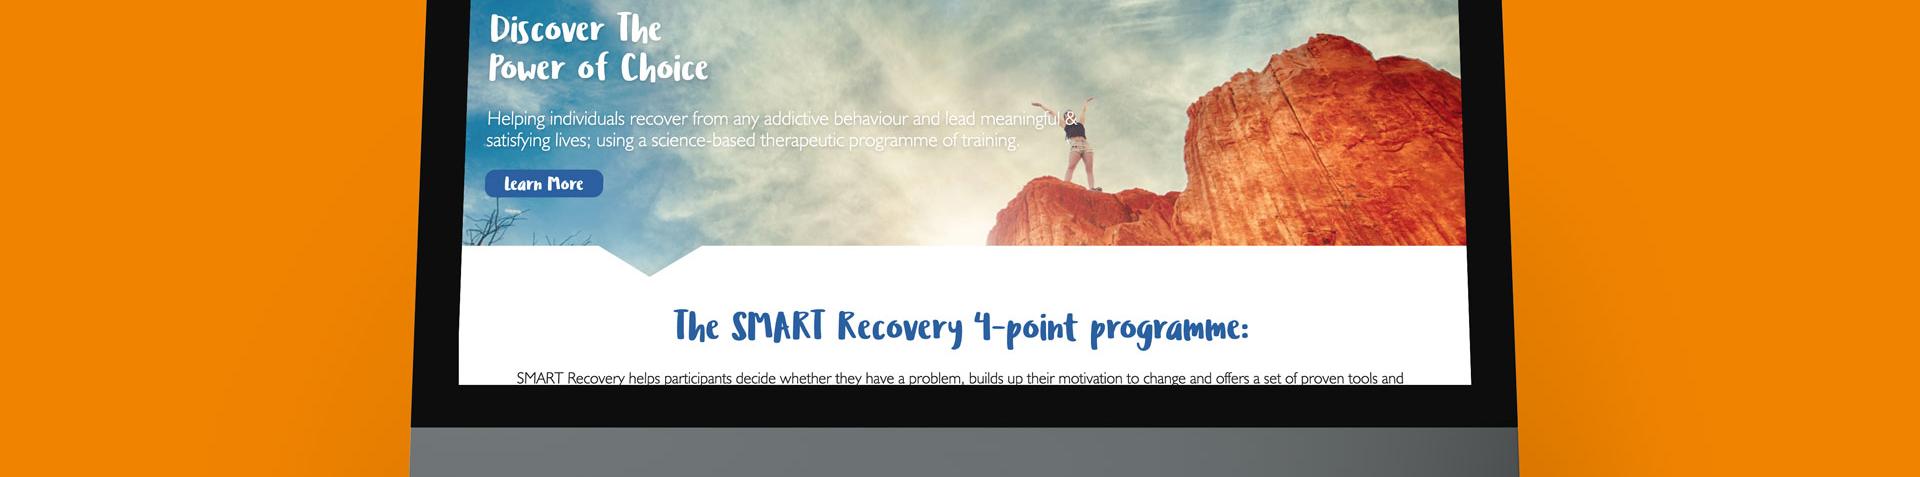 smart recovery website preview